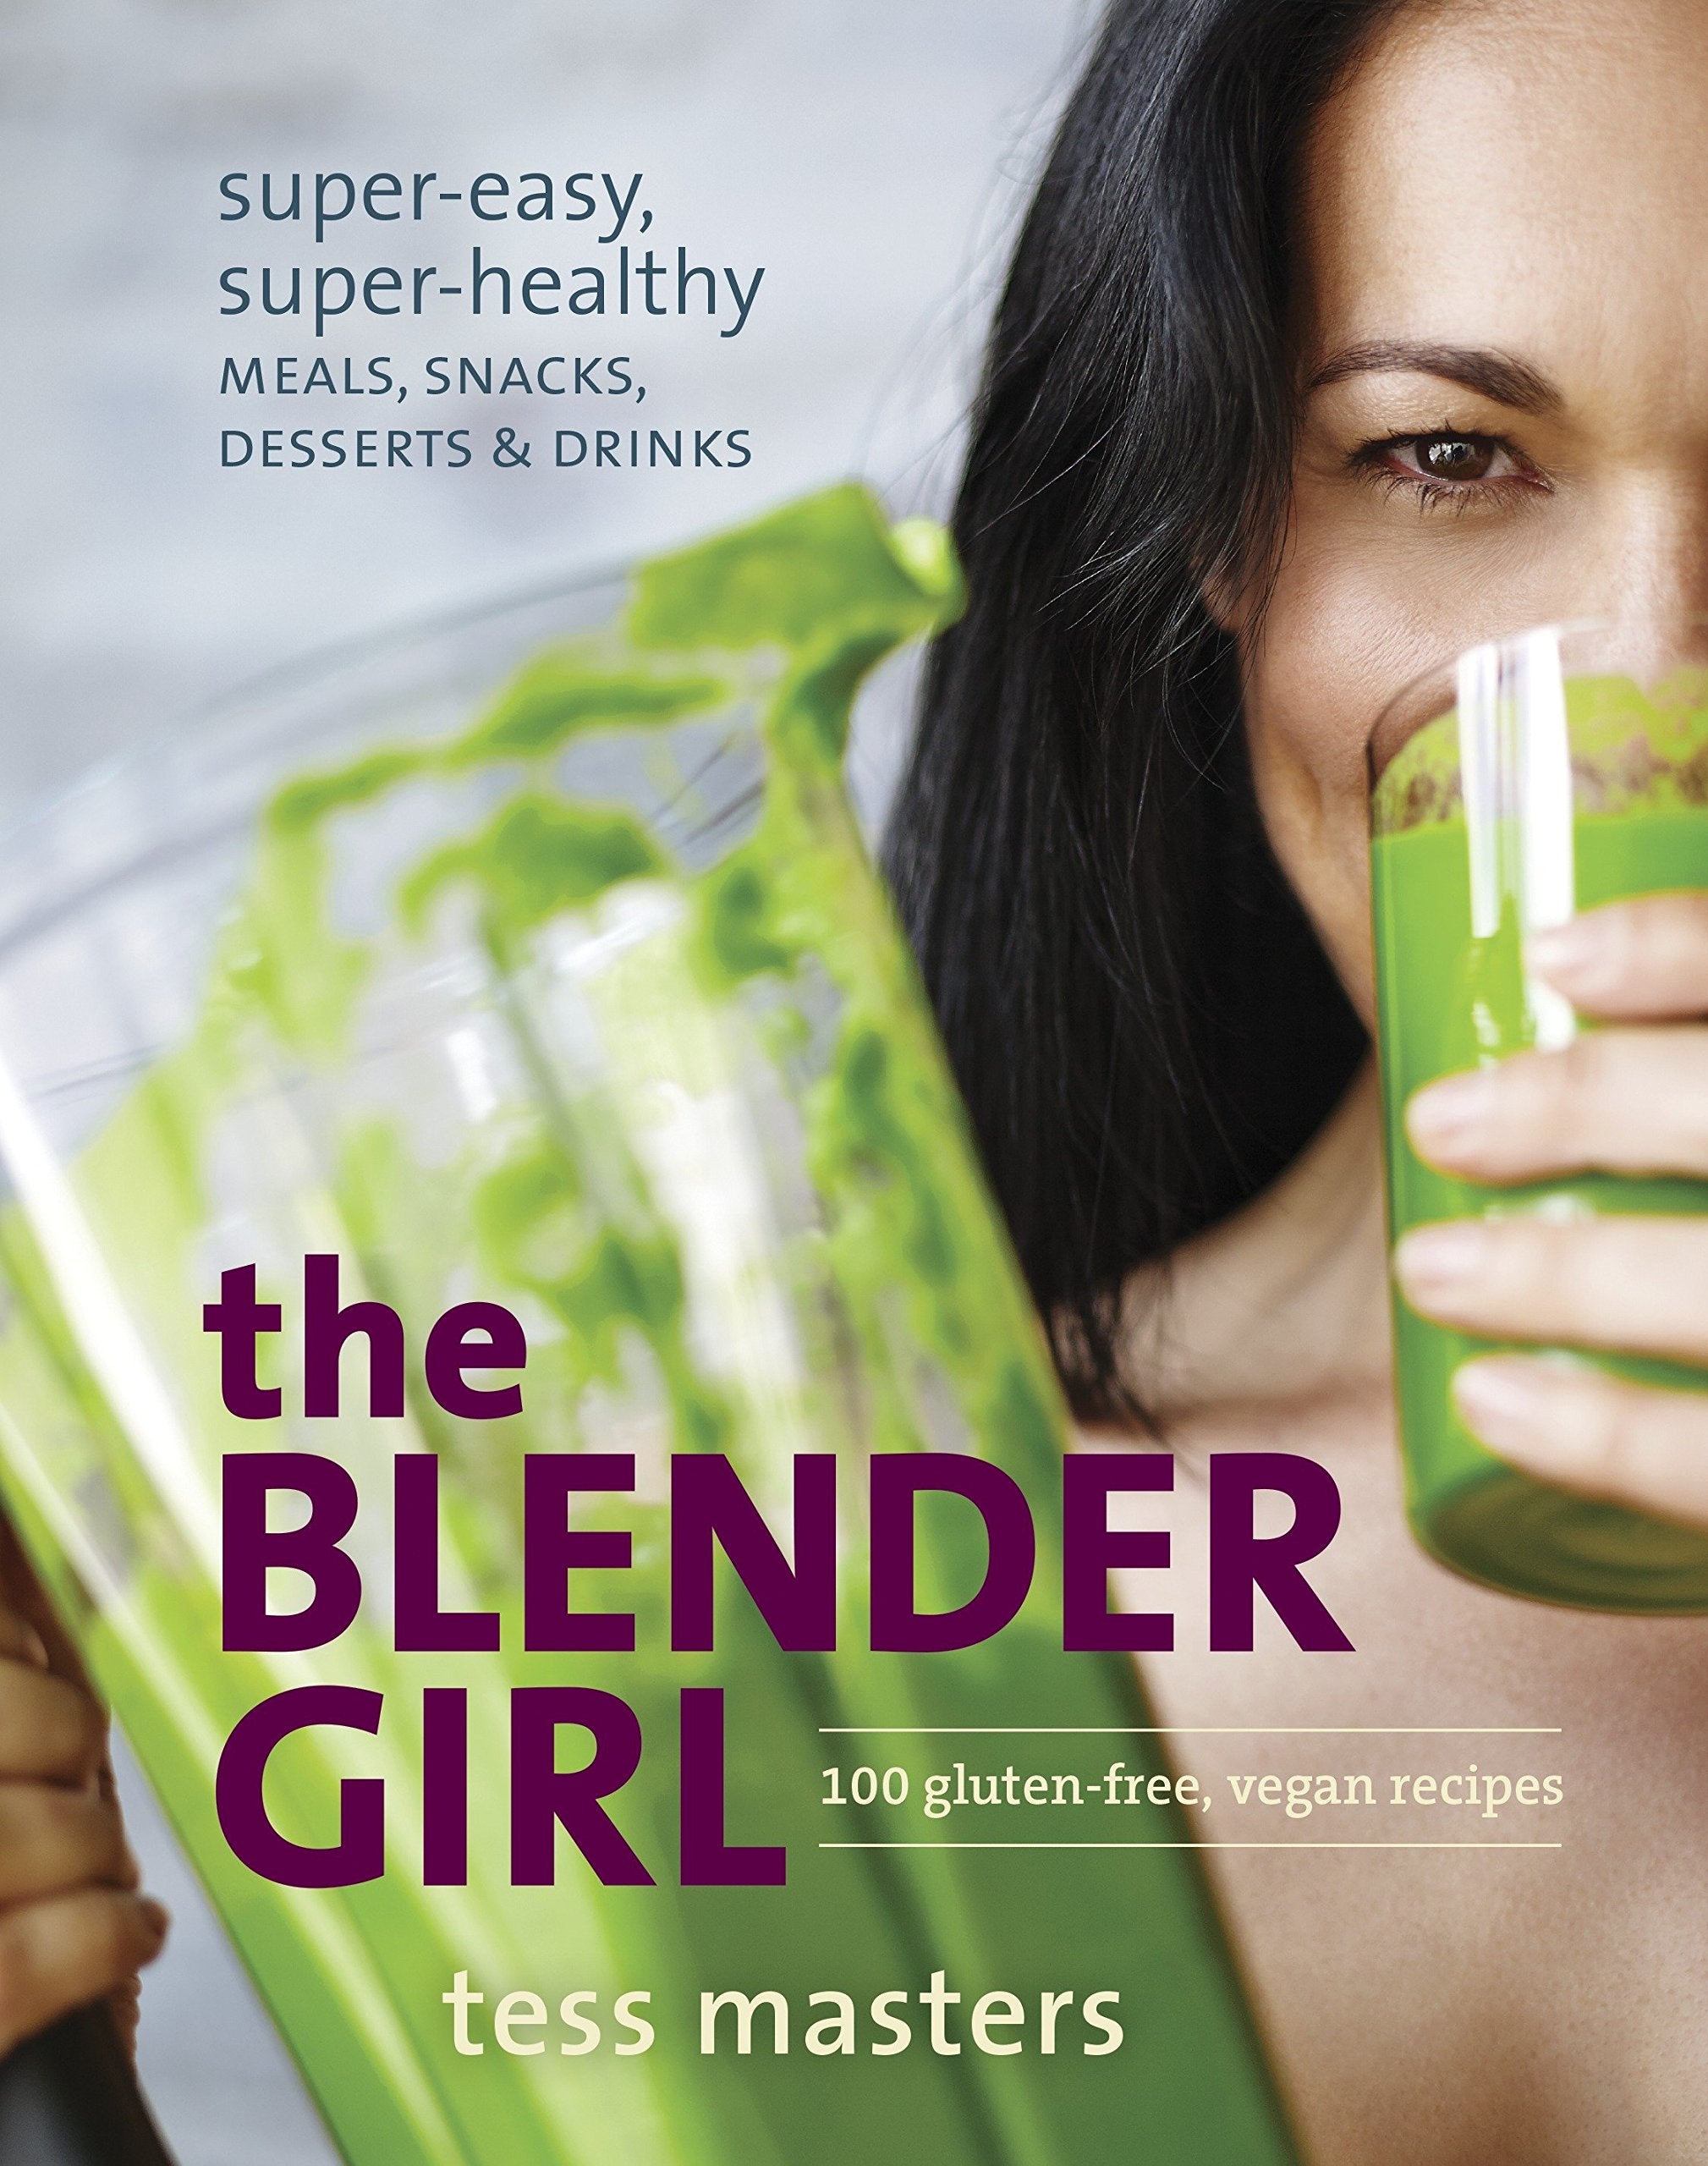 The Blender Girl: Super-Easy, Super-Healthy Meals, Snacks, Desserts, and Drinks--100 Gluten-Free, Vegan Recipes (Tess Masters)